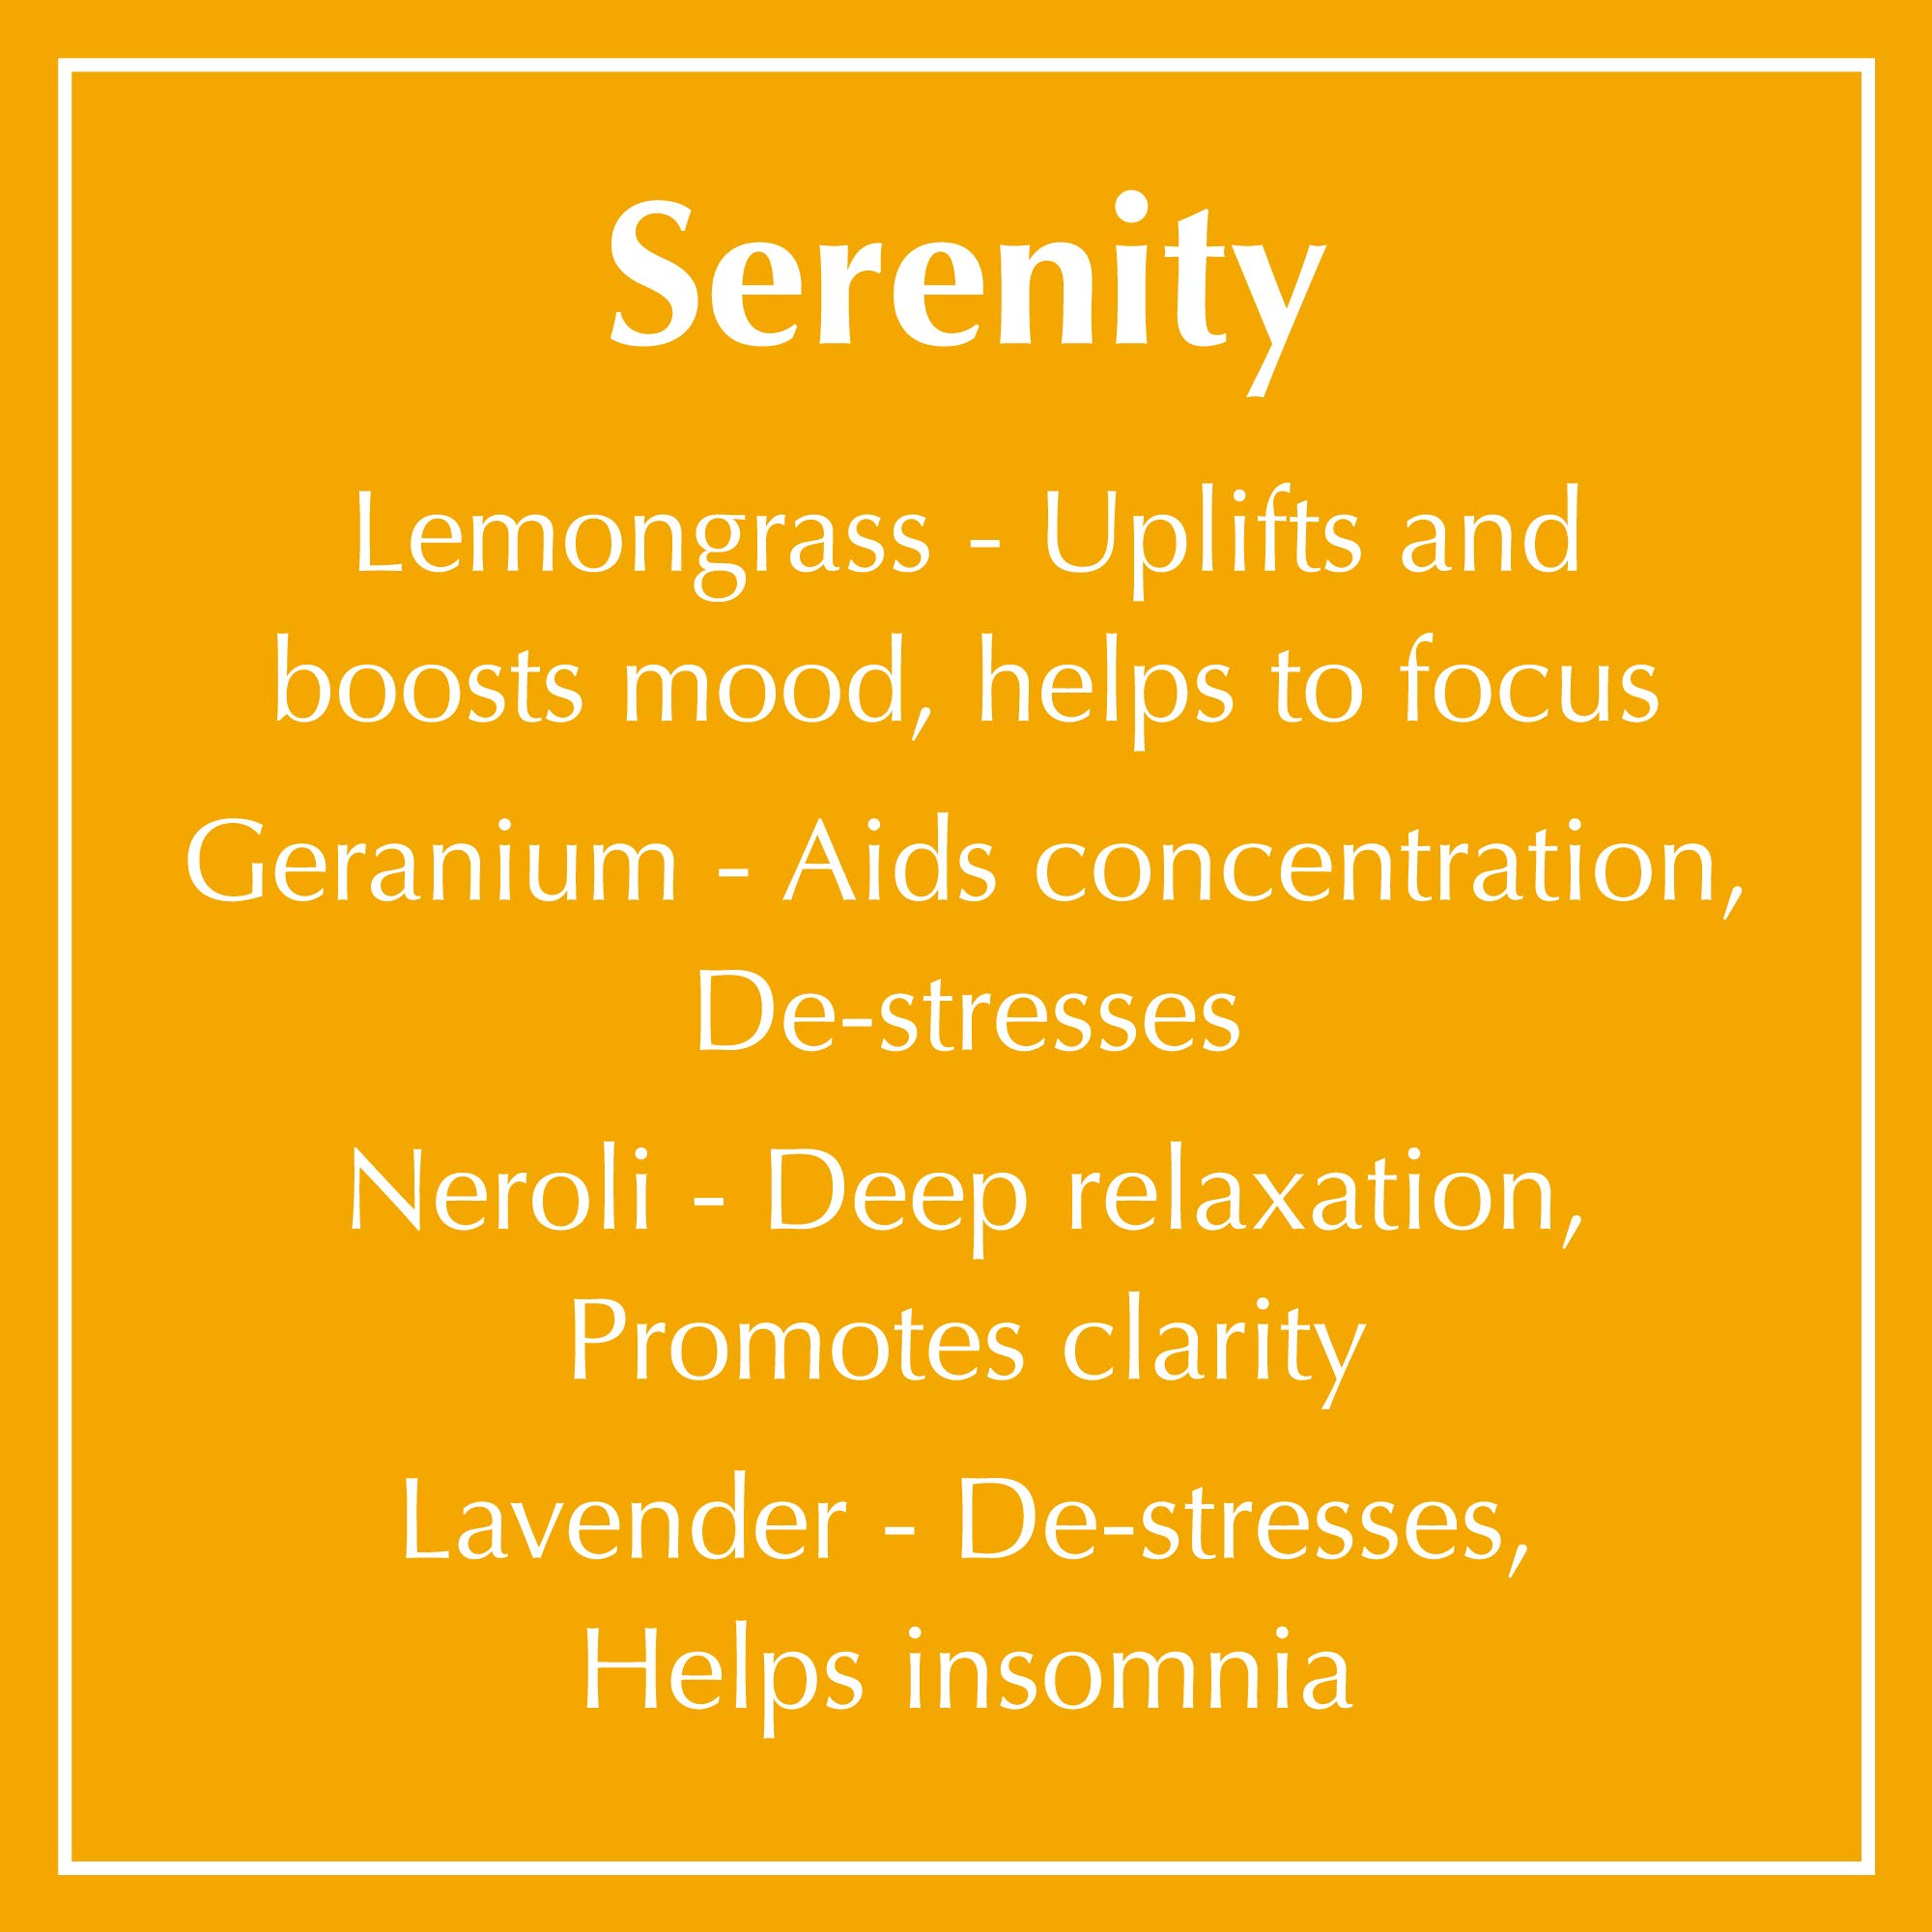 Aromaworks Serenity Aromabomb Duo - Free Your Mind From Stresses Of The Day - Energize Your Mind - Features A Warm Aroma - Key Ingredients Of Lavender, Neroli And Lemongrass - 2 X 8.81 Oz Bath Bomb